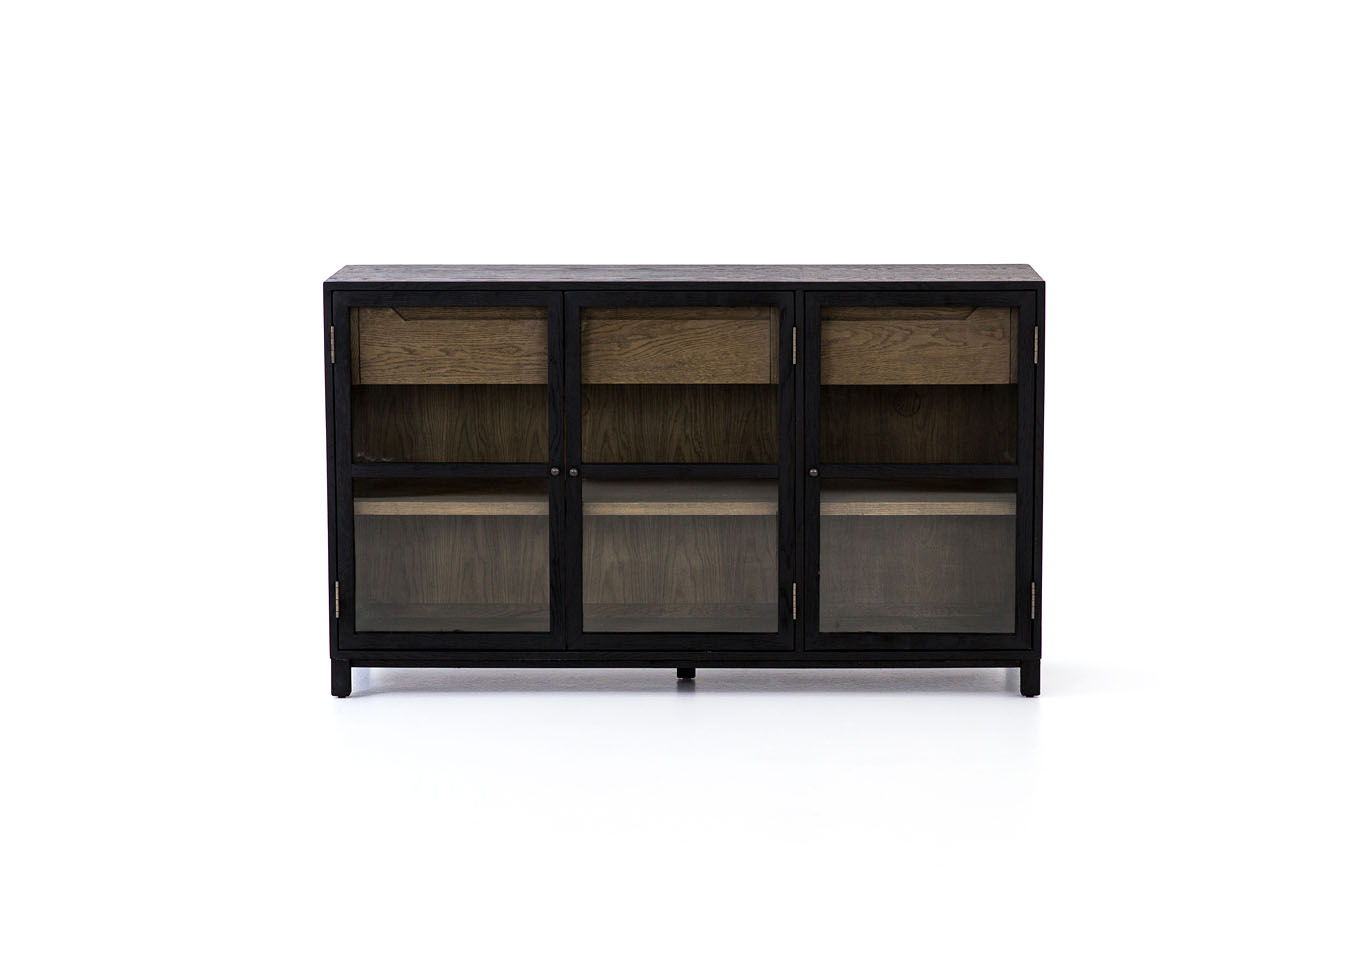 Drifted Oak + Drifted Black + Clear Glass Irondale Millie Sideboard-Drifted Black,Four Hands Furnishing Style